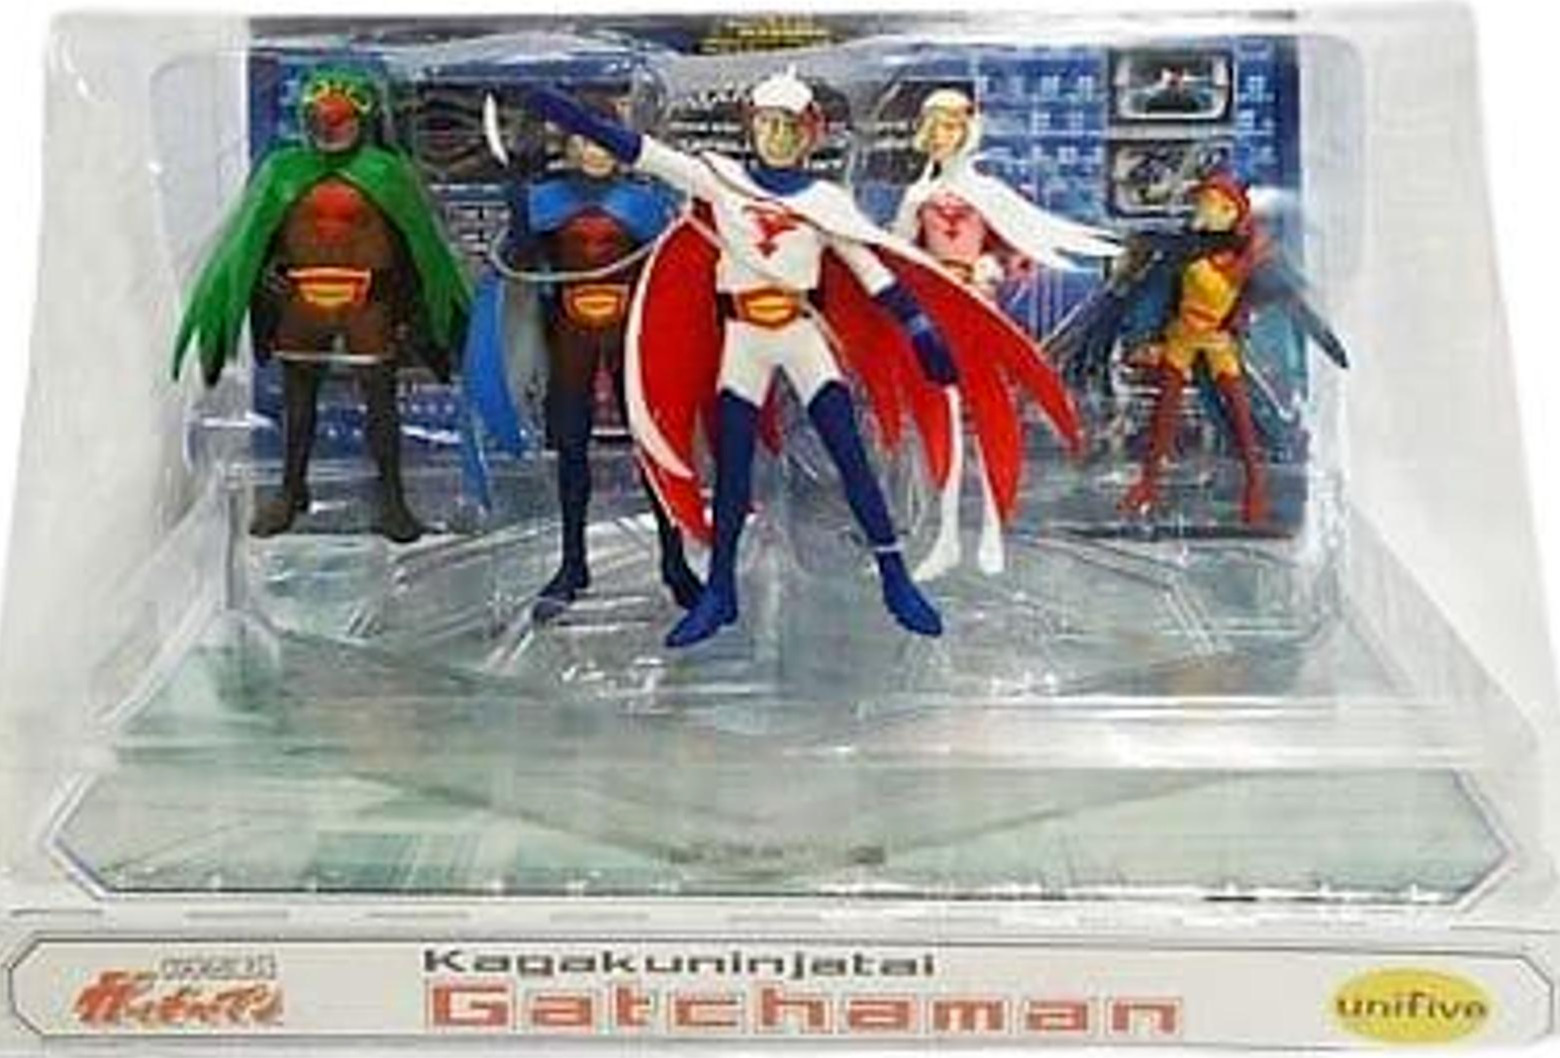 Battle of the Planets Science Ninja Team Gatchaman Set of 5 Figures Unifive